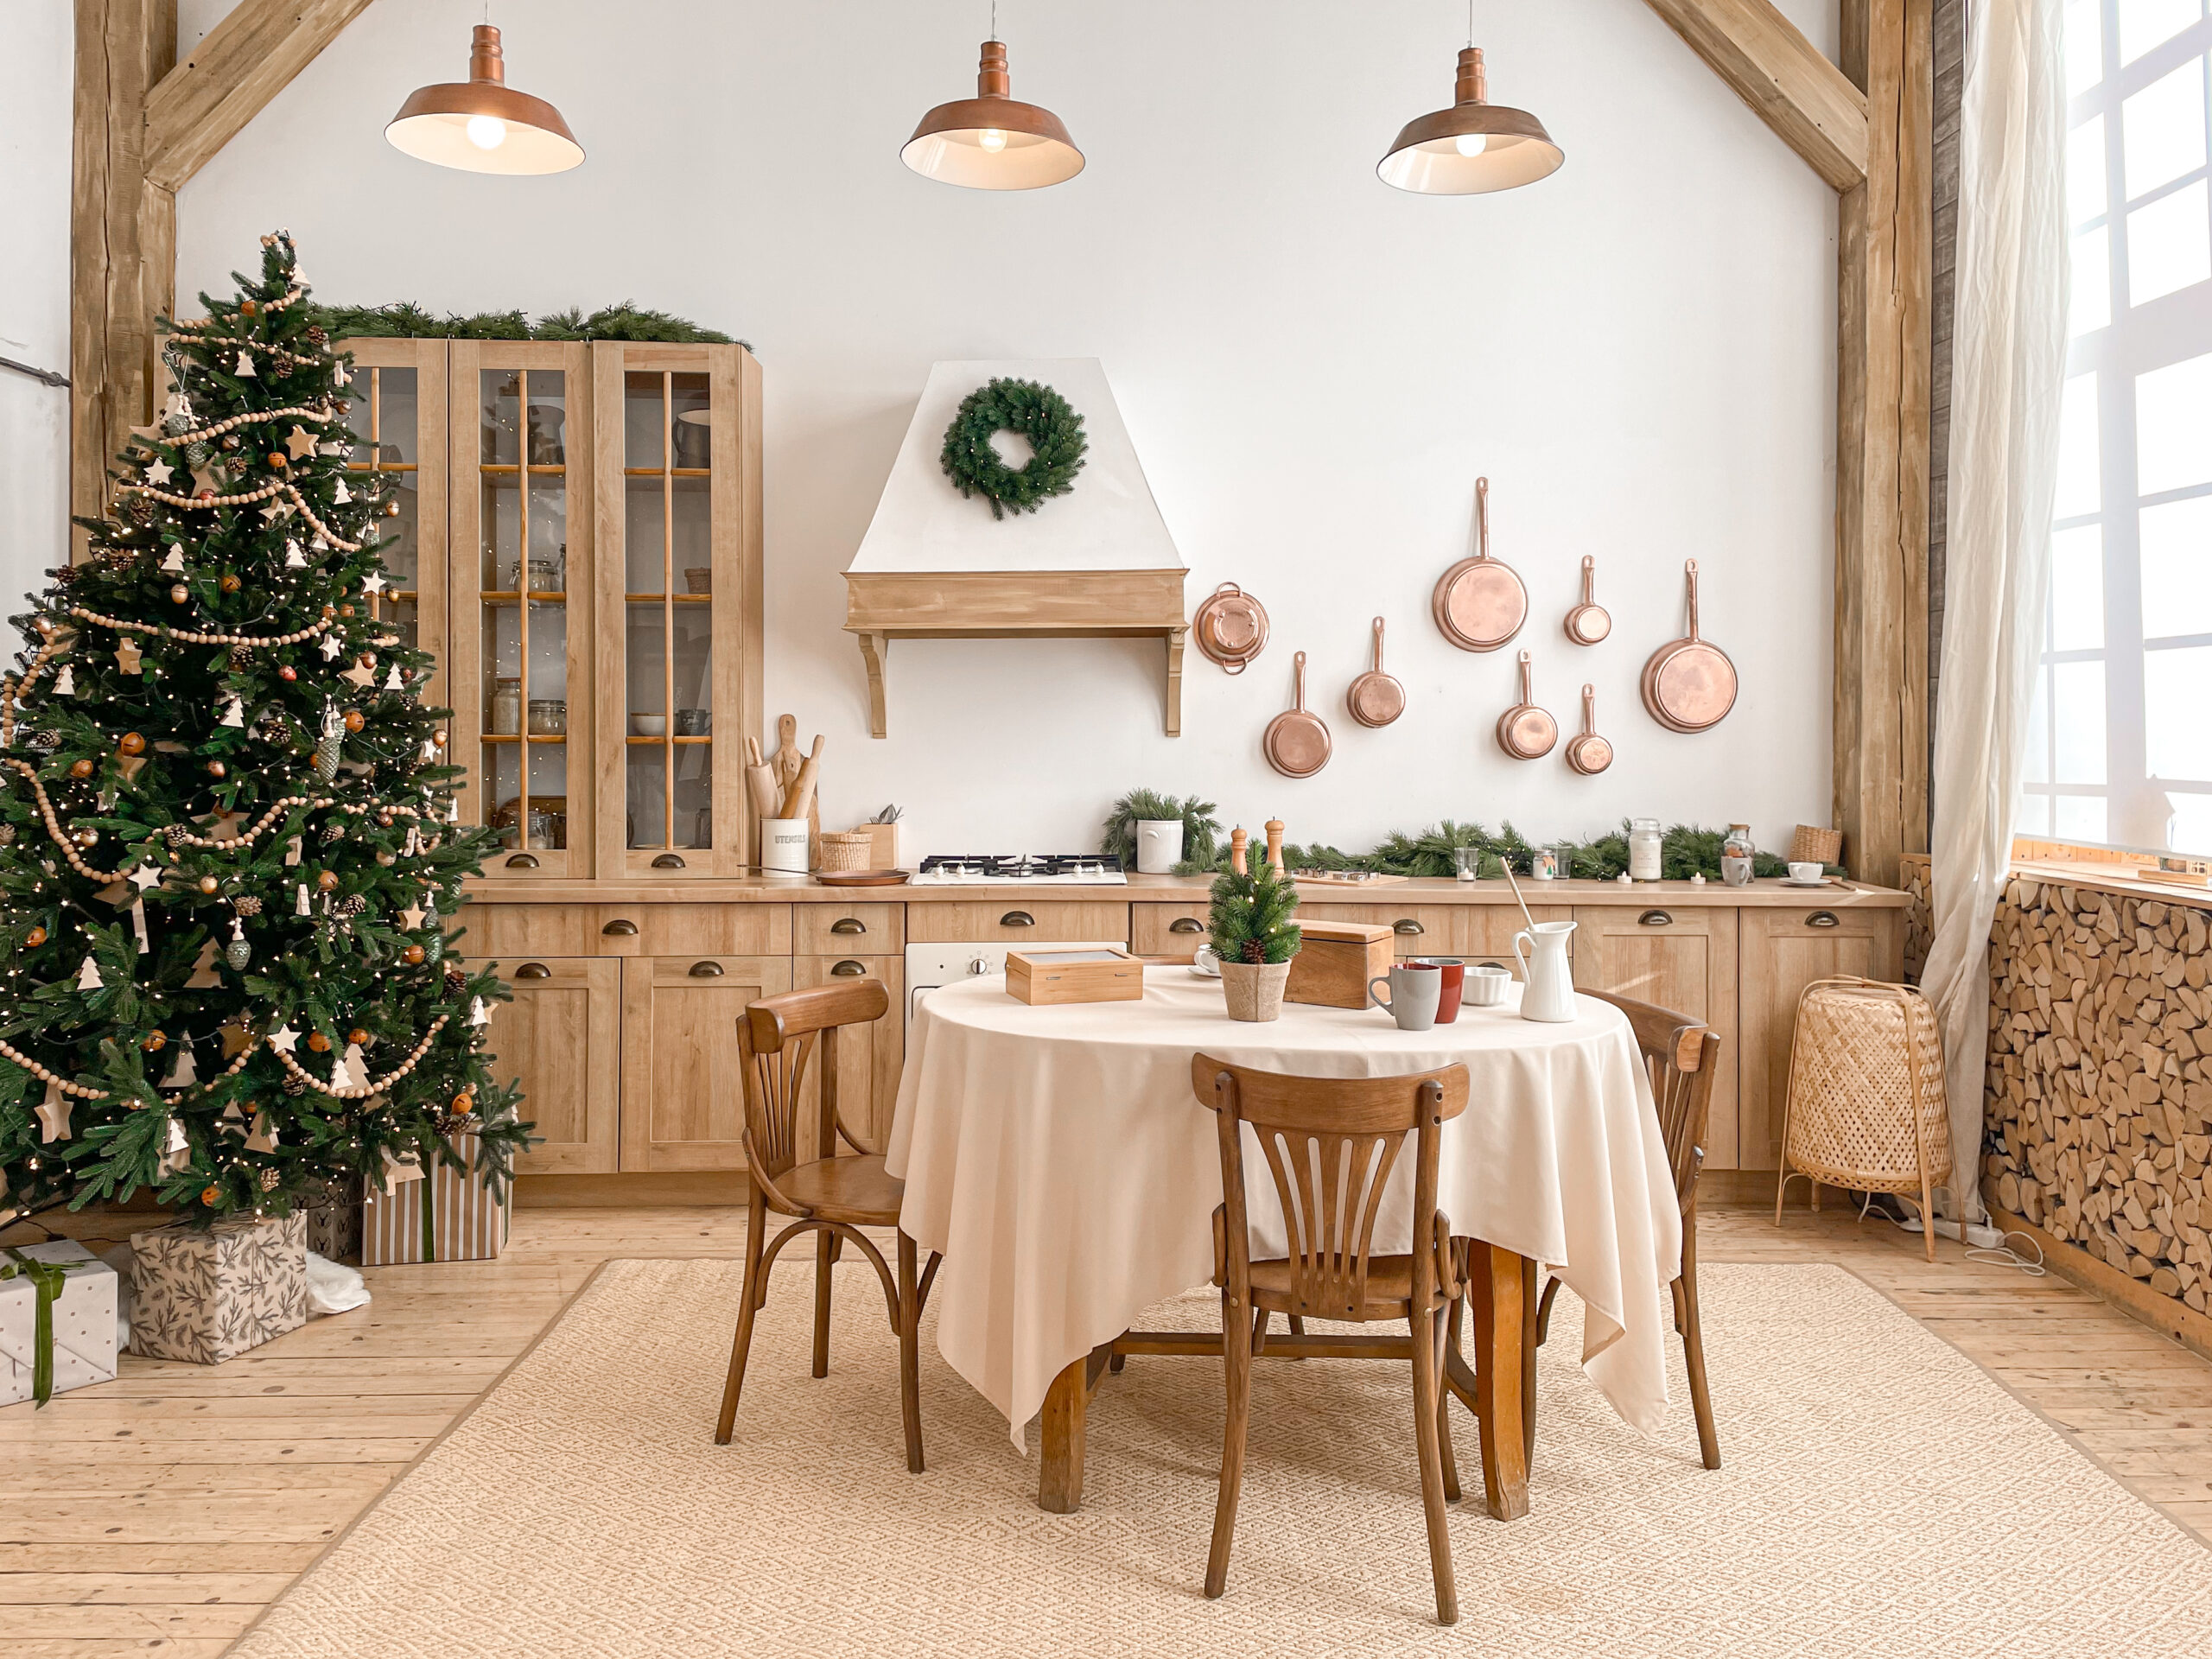 Modern, light, festive, cozy kitchen interior with Christmas and New Year decorations, kitchen table, utensils, copper pans on wall and big Christmas tree with presents, winter holidays concept